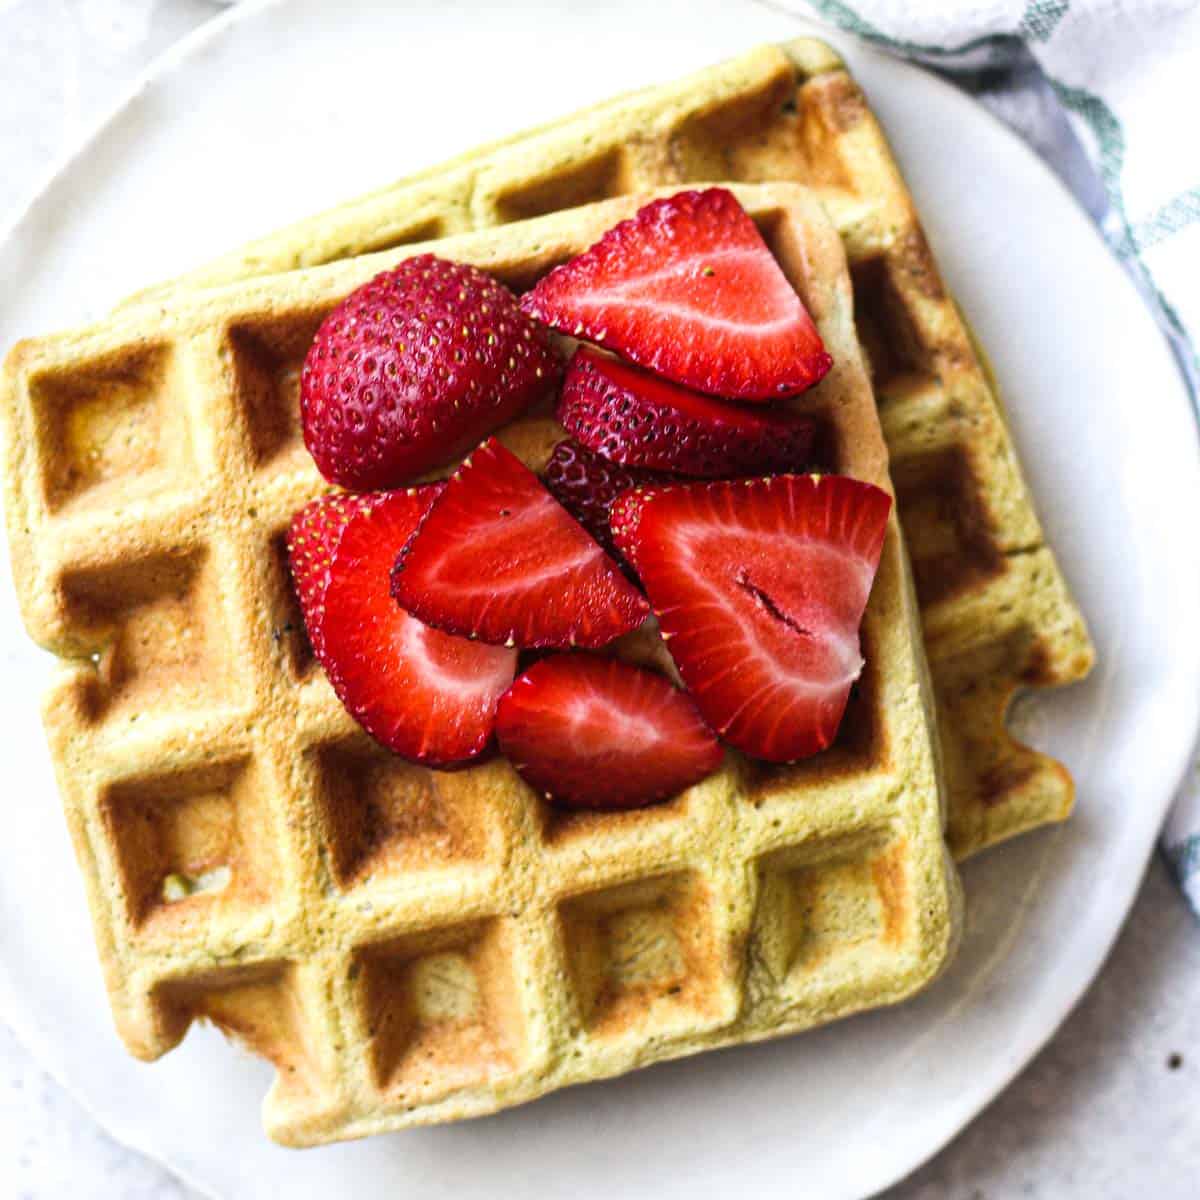 featured image of waffles with strawberries, top view